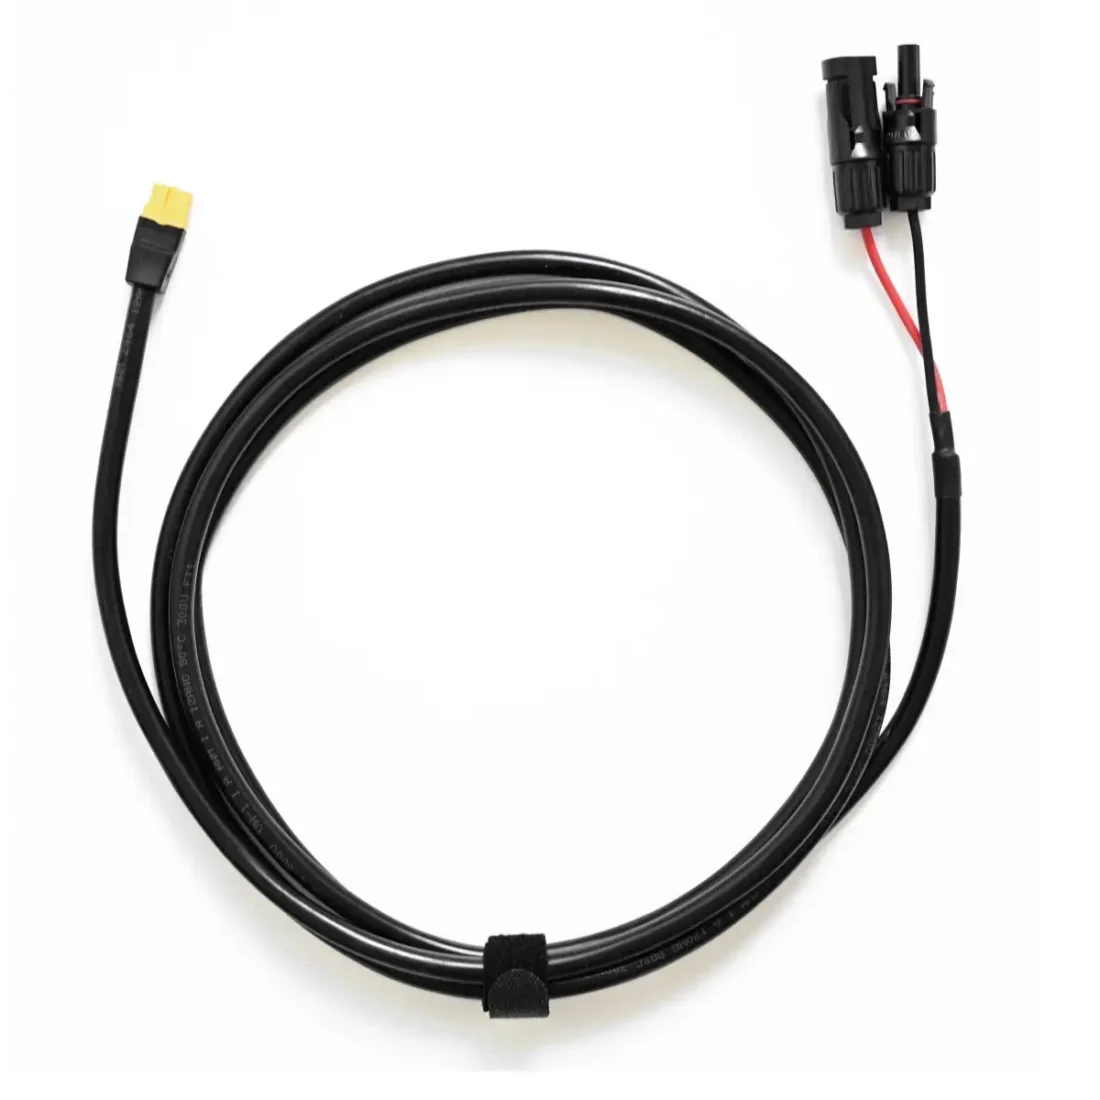 MC4 Compatible to XT60 Cable - 3 metres